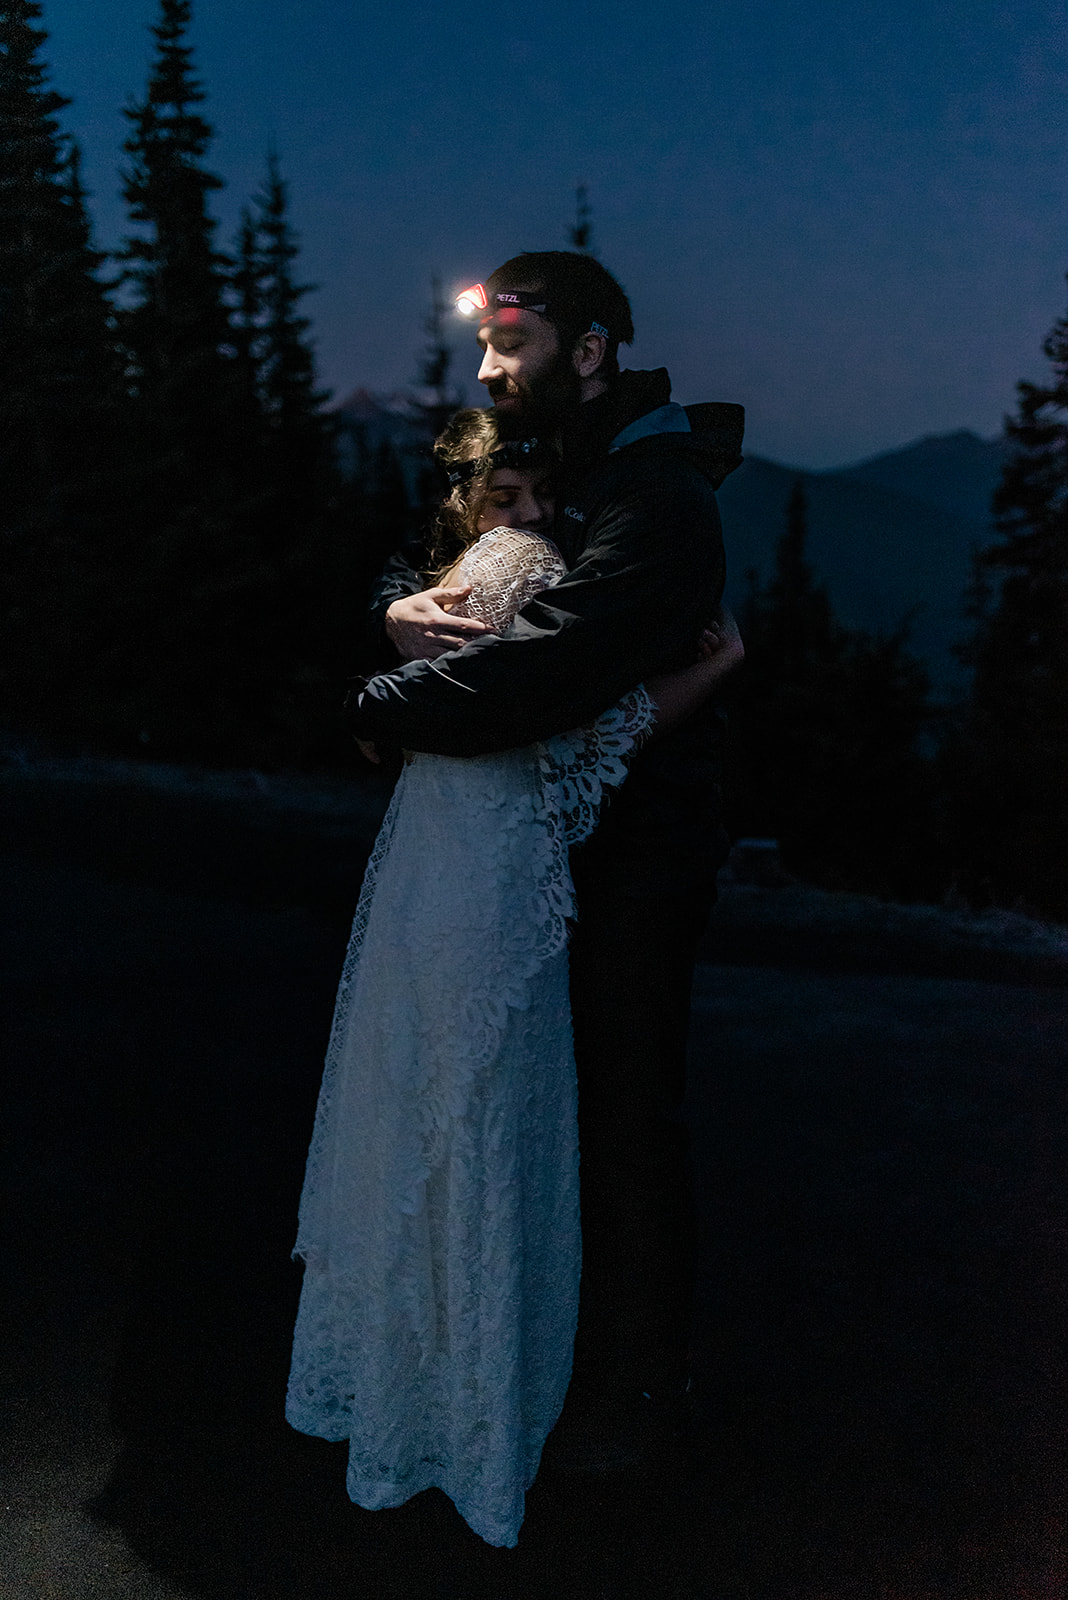 This is a couple on their wedding day before the sun has risen. They are hugging.